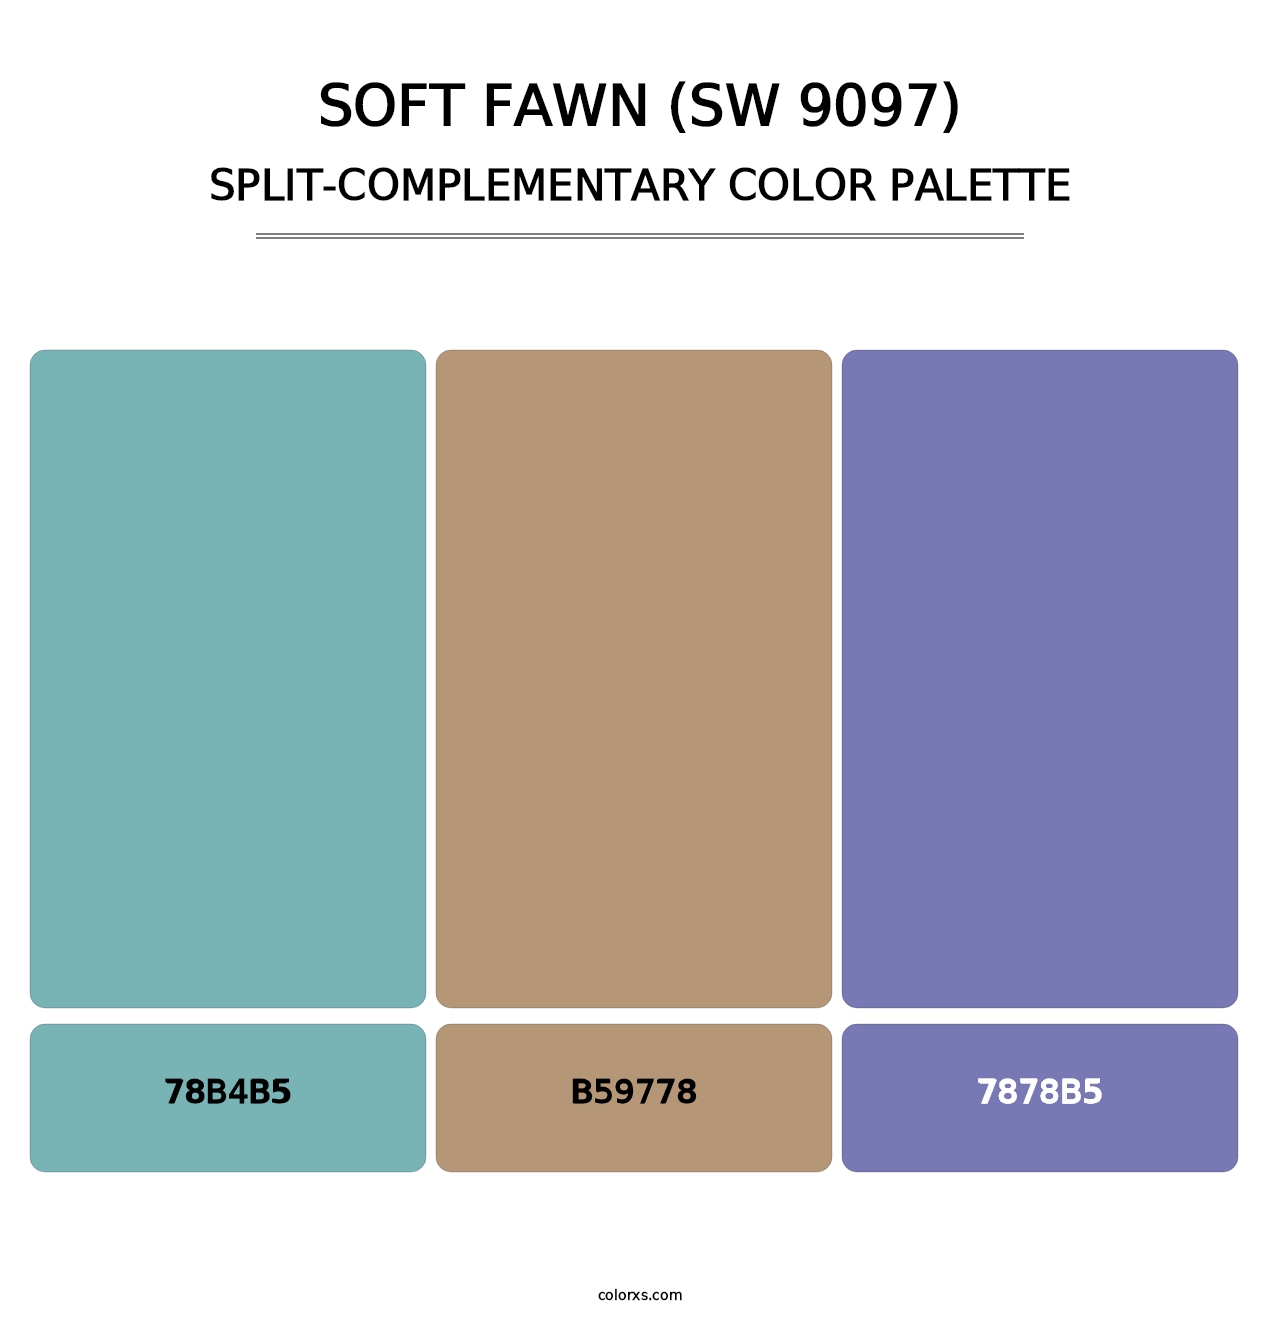 Soft Fawn (SW 9097) - Split-Complementary Color Palette